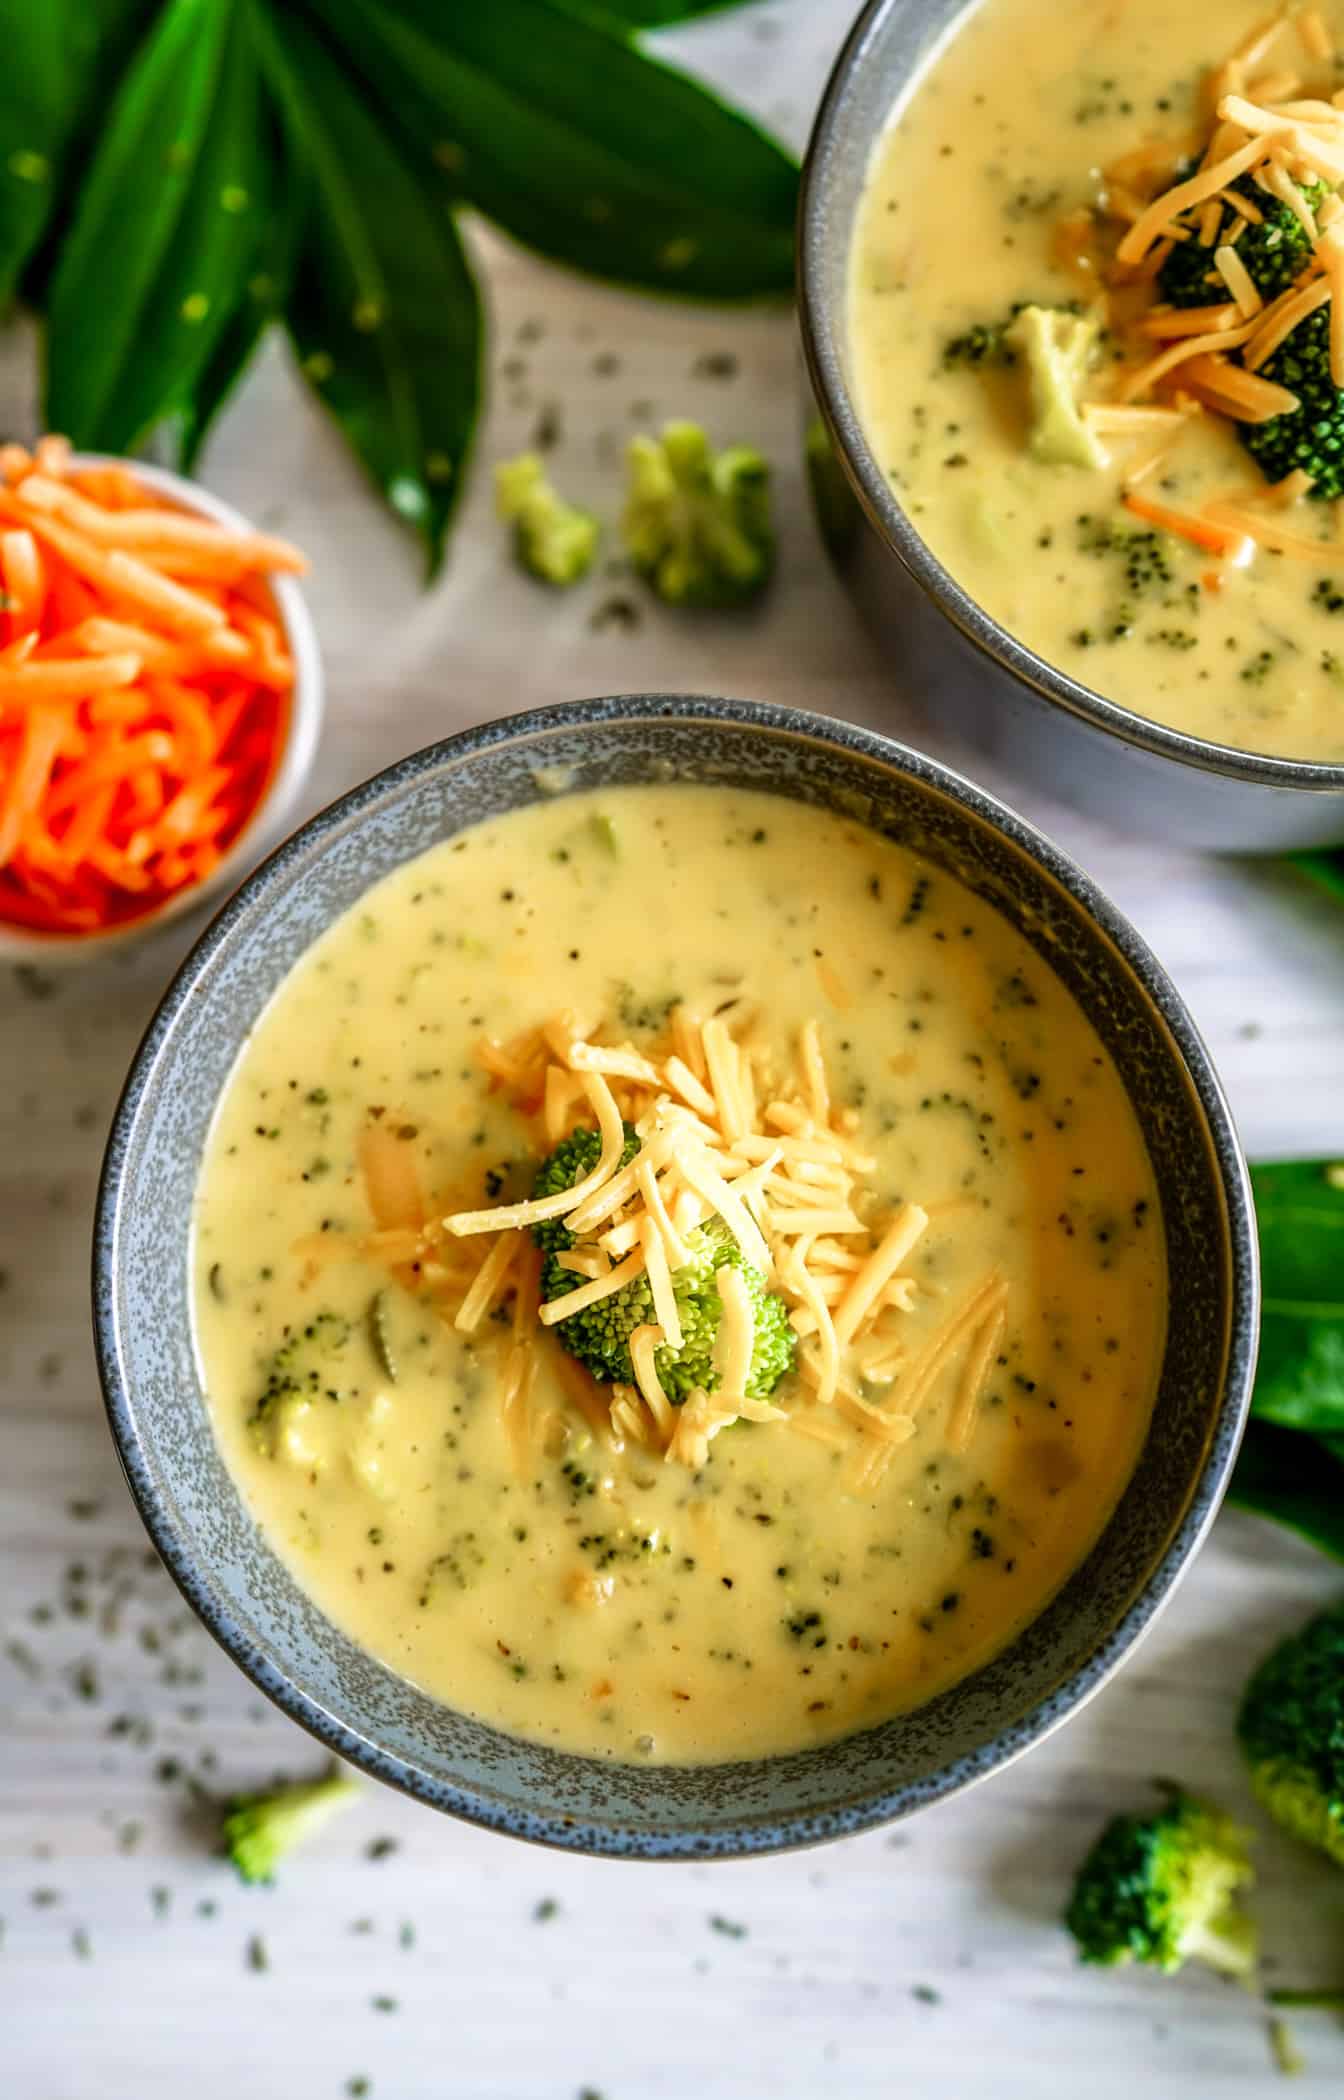 This Instant Pot Broccoli Cheddar Soup is filled with hearty veggies and a good helping of cheese.  This soup recipe will be one of the best things you cook all week in your Instant Pot.  This Broccoli Cheddar Soup is easy and delicious and an easy dinner to prepare on Sunday. Try this Broccoli Cheddar Soup today and let us know what you think! 